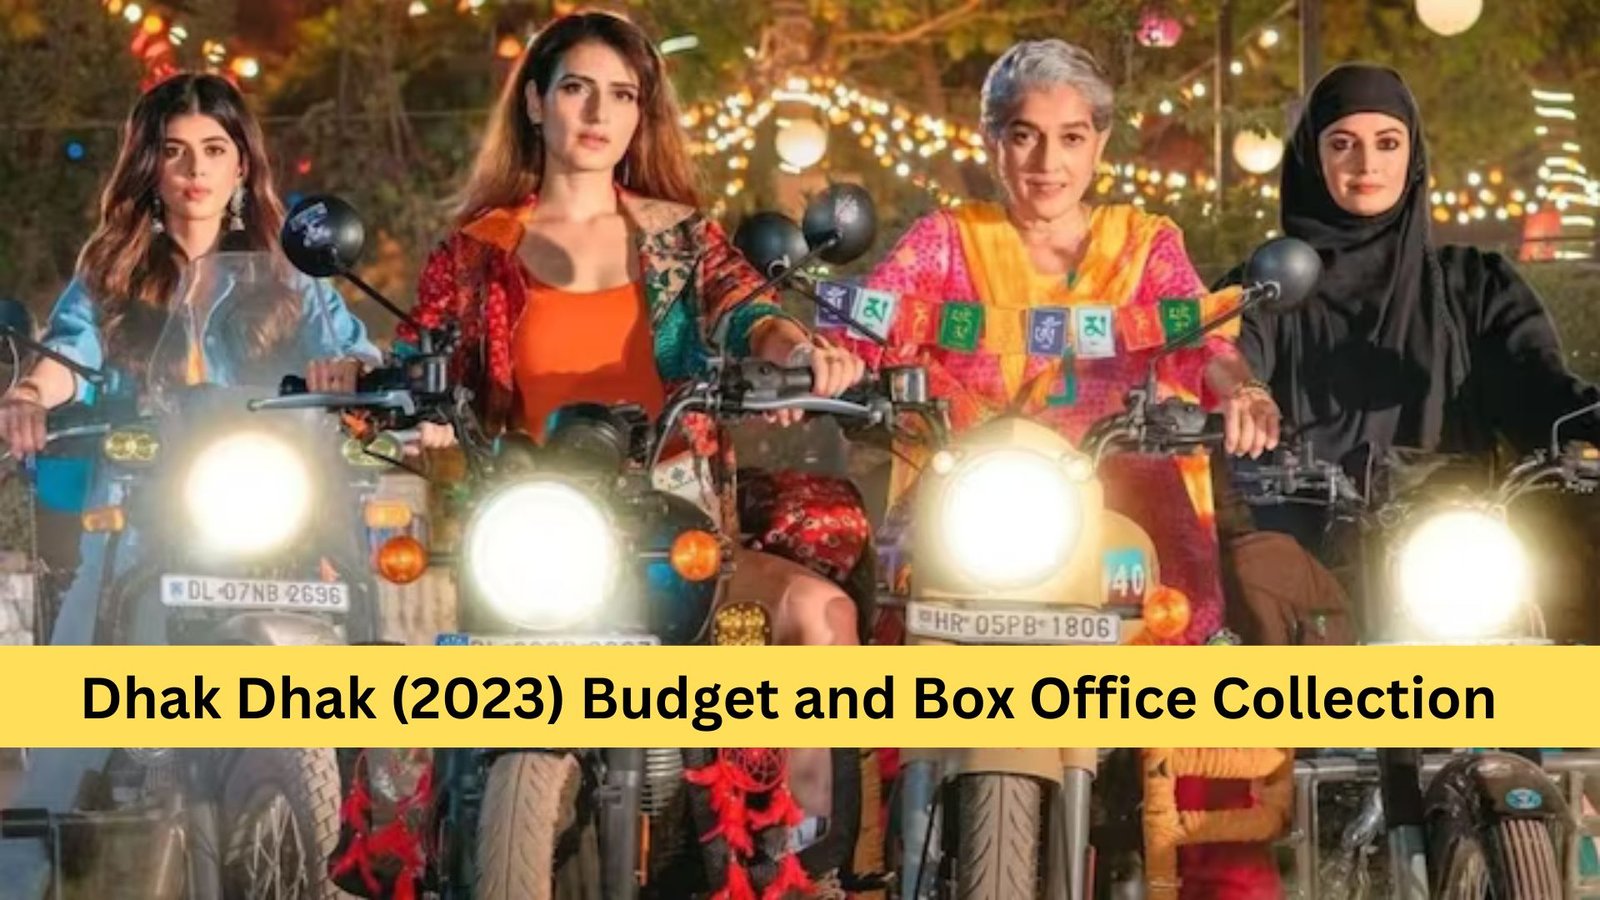 Dhak Dhak (2023) Movie Budget, Story Plot, and Box Office Collection